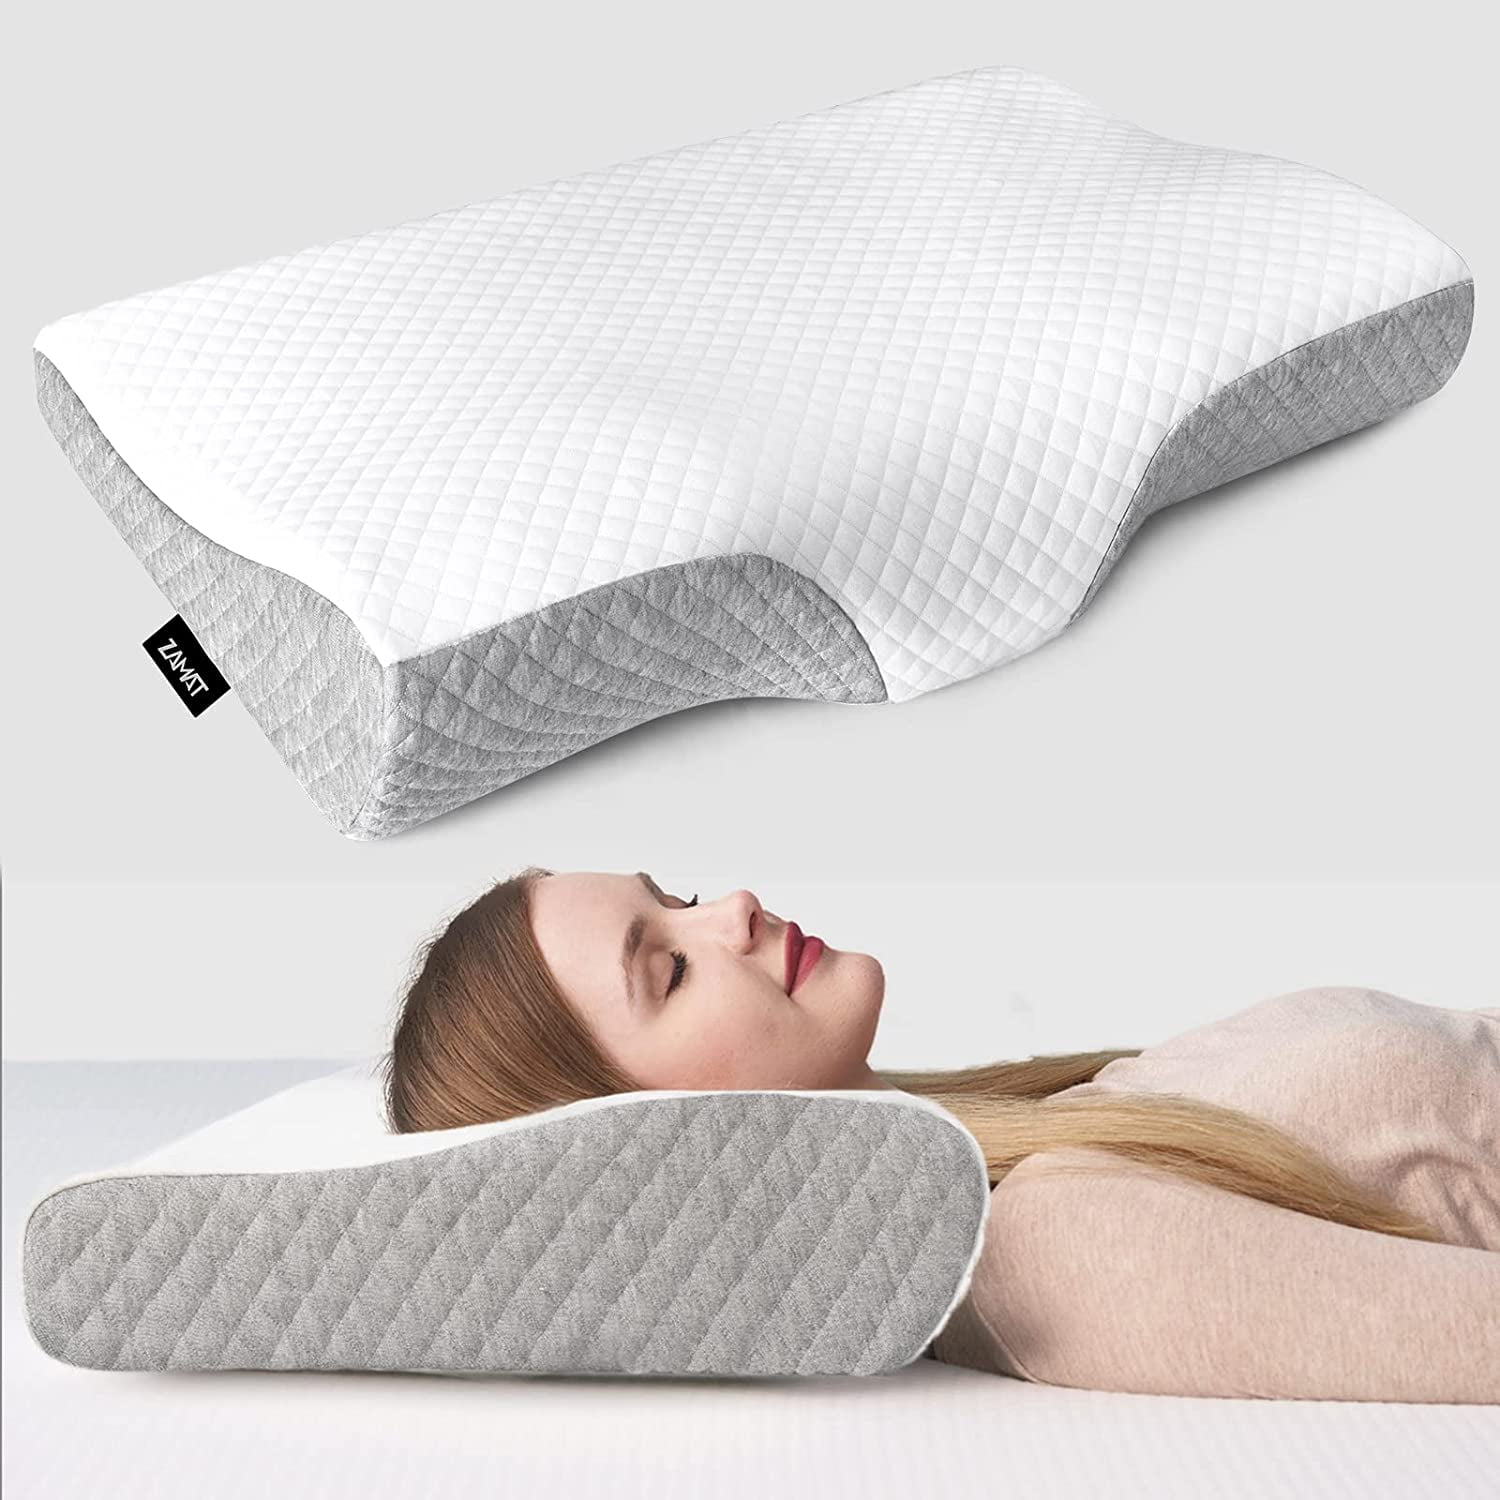 FREE COVER CONTOUR MEMORY FOAM PILLOW ORTHOPAEDIC FIRM PILLOWS 